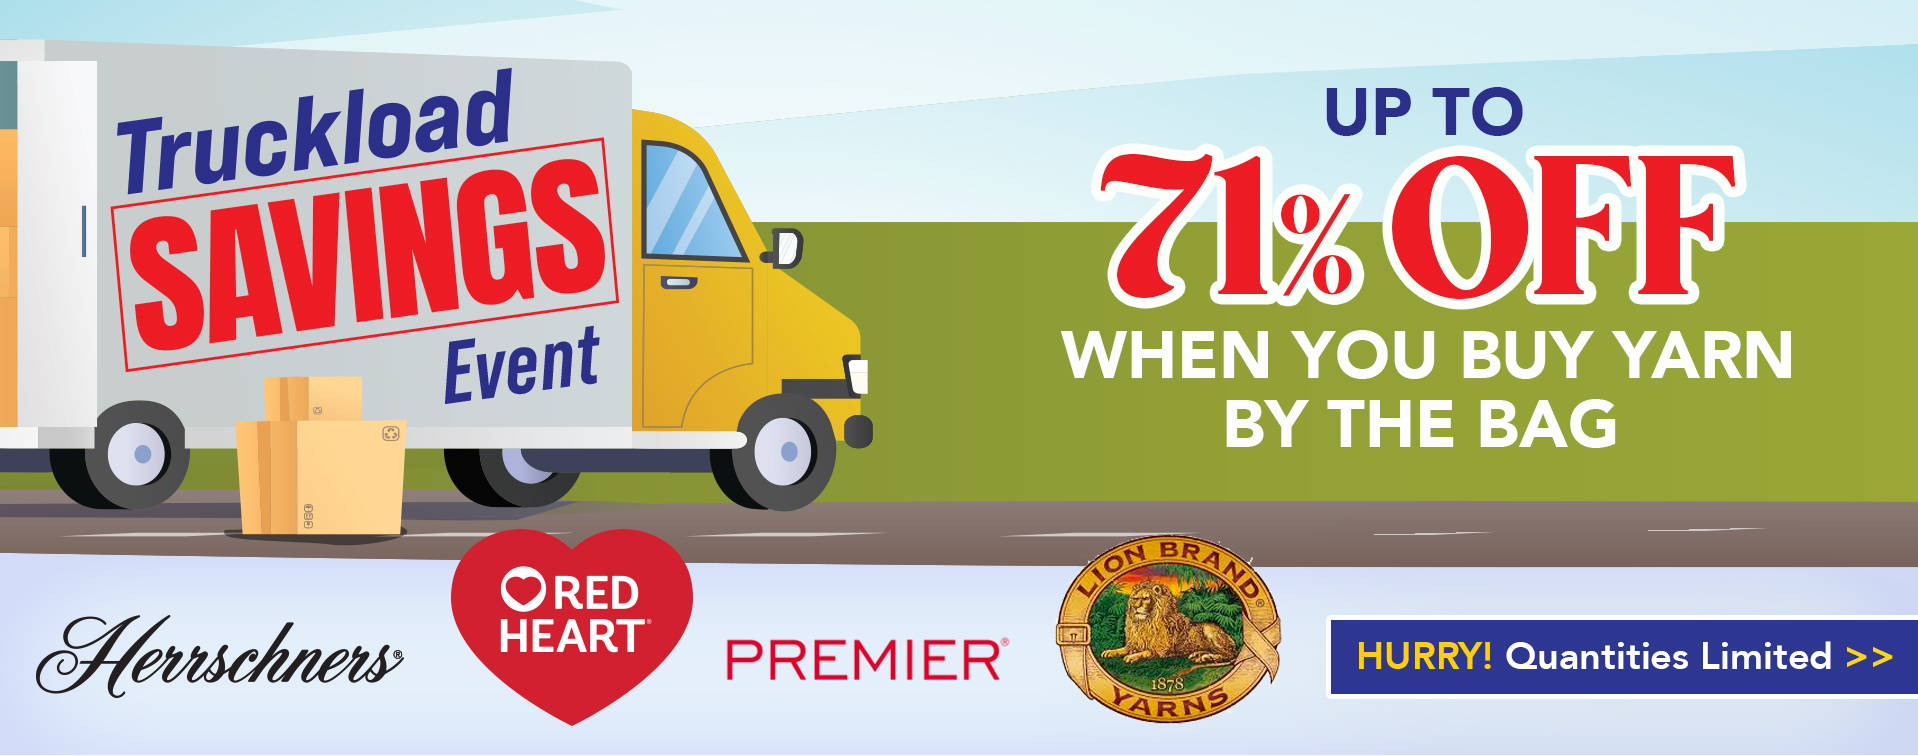 Truckload Savings Event Up to 71% off When you buy yarn by the bag.